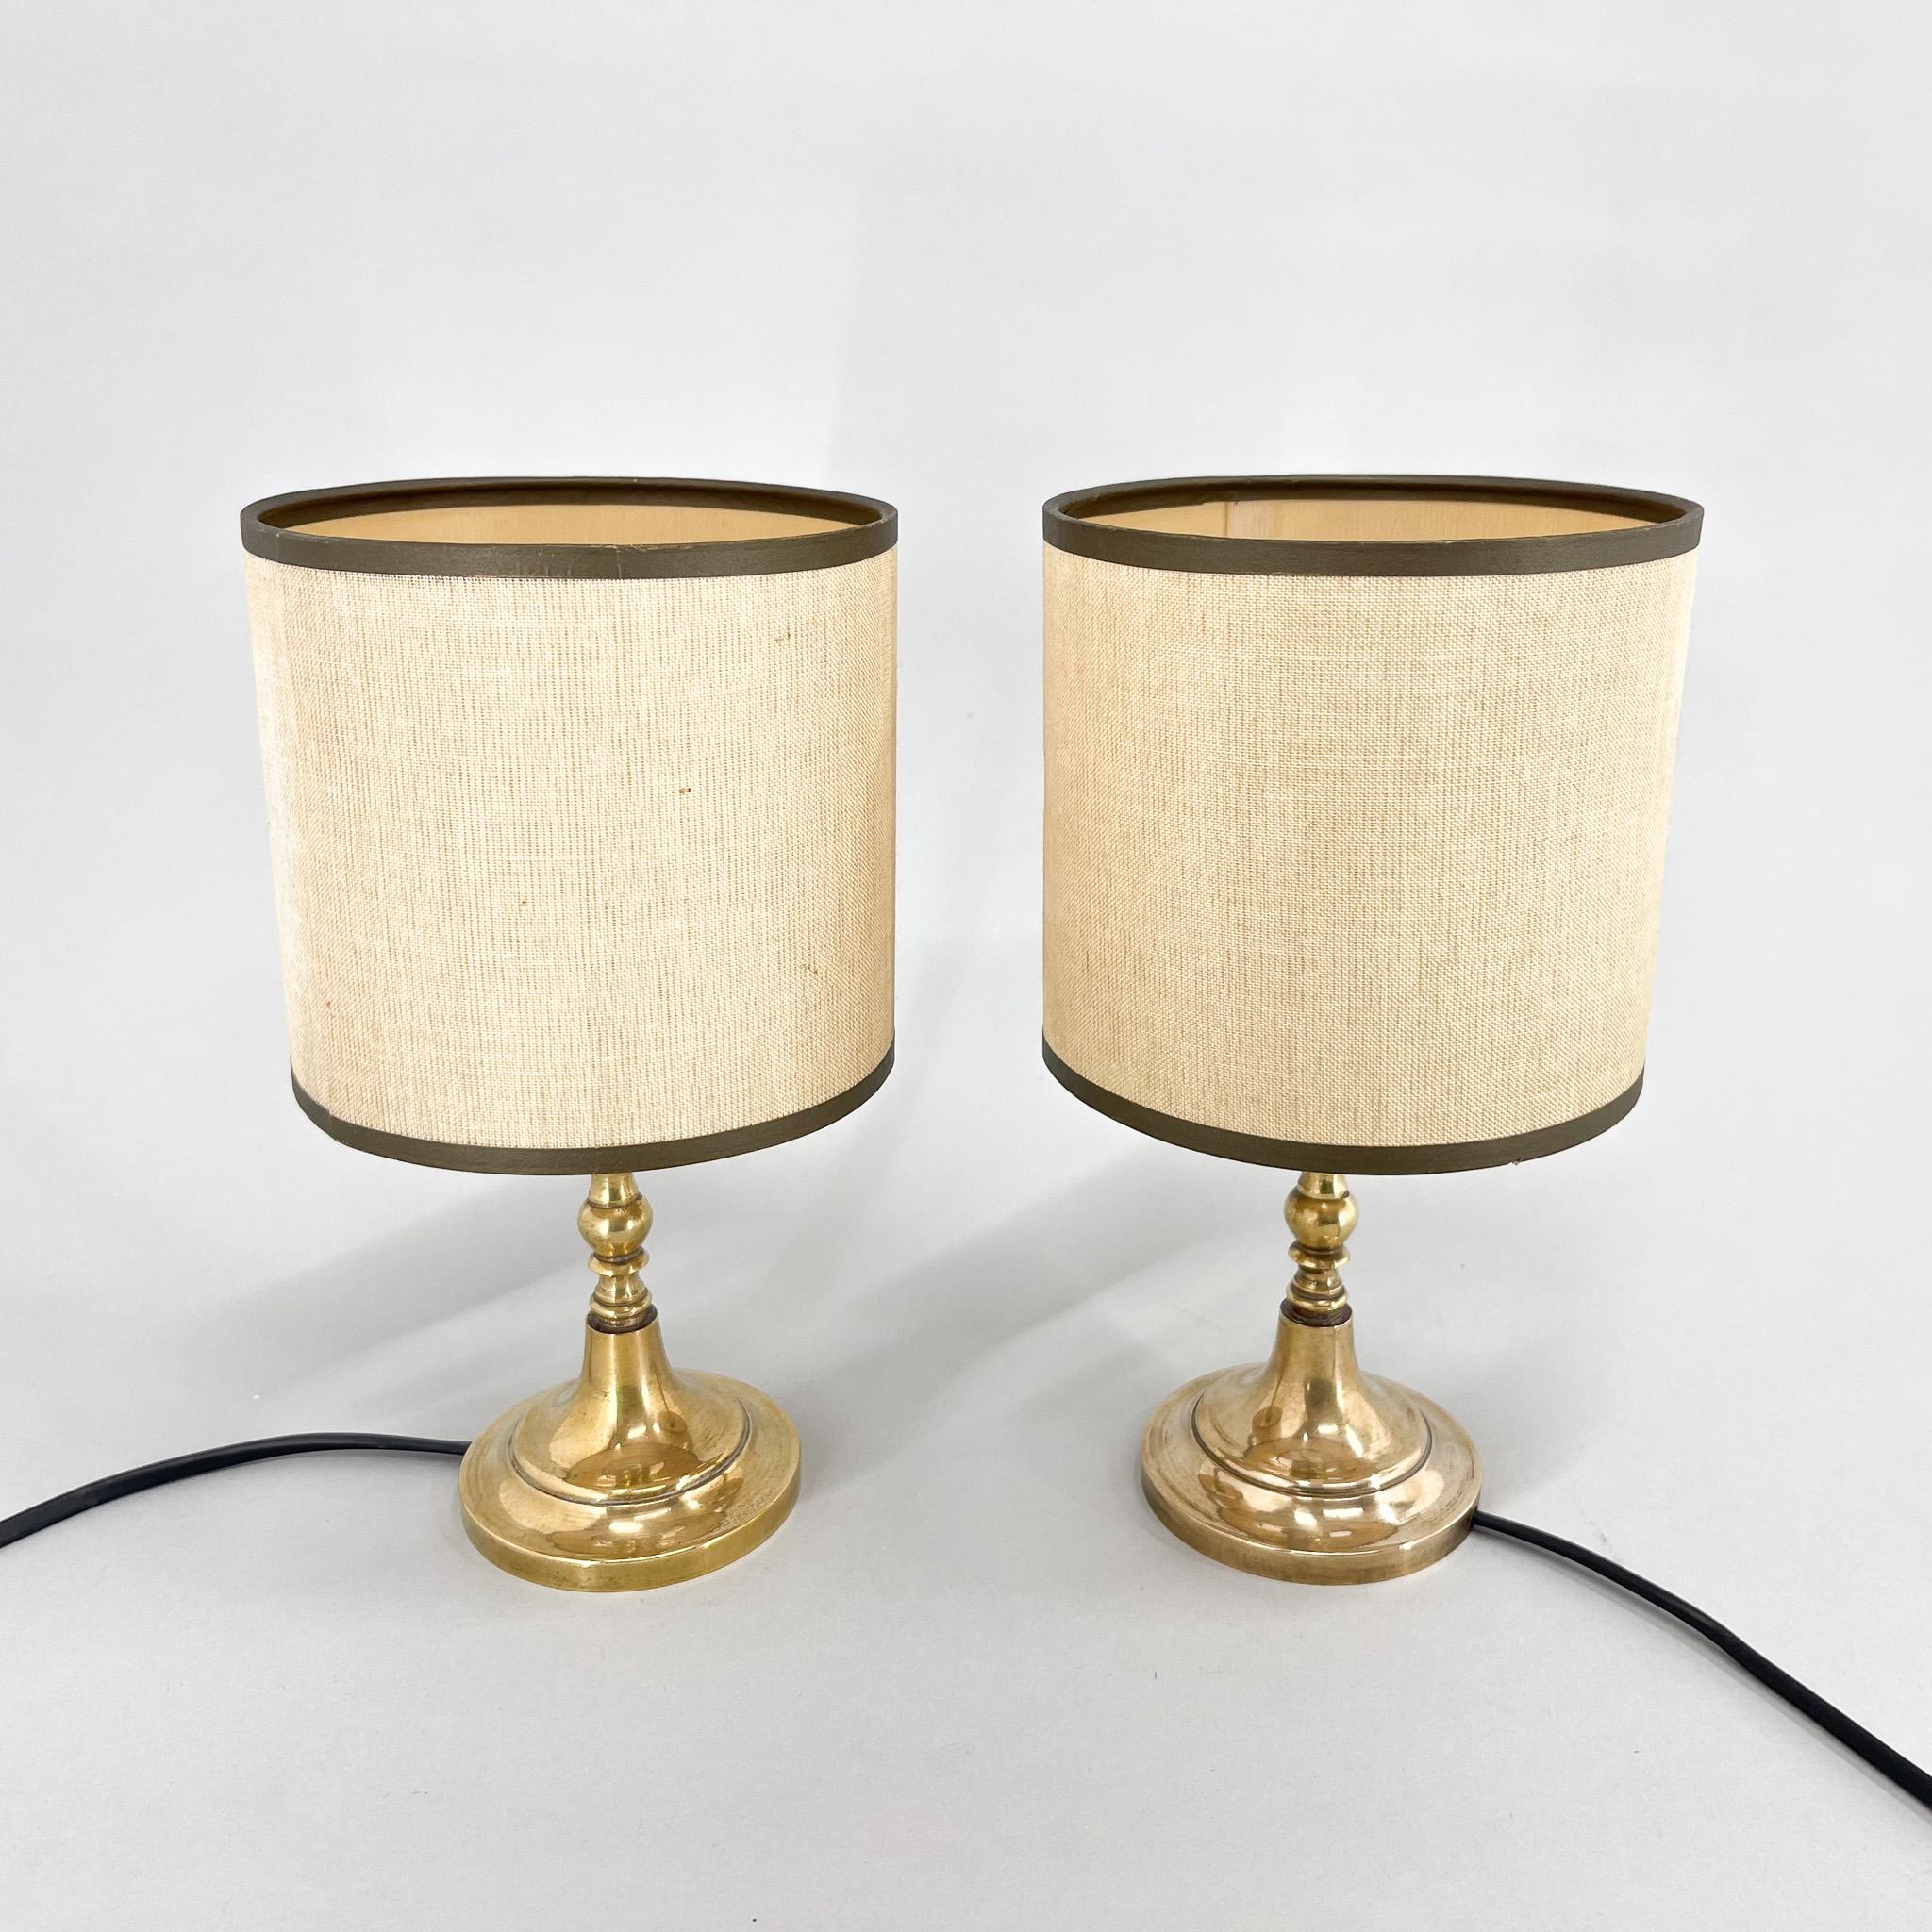 Set of two vintage table or bedside lamps from Italy. Brass base and original fabric lamp shade. Rewired. Bulb: 2x 1  E14. US plug adapter included.